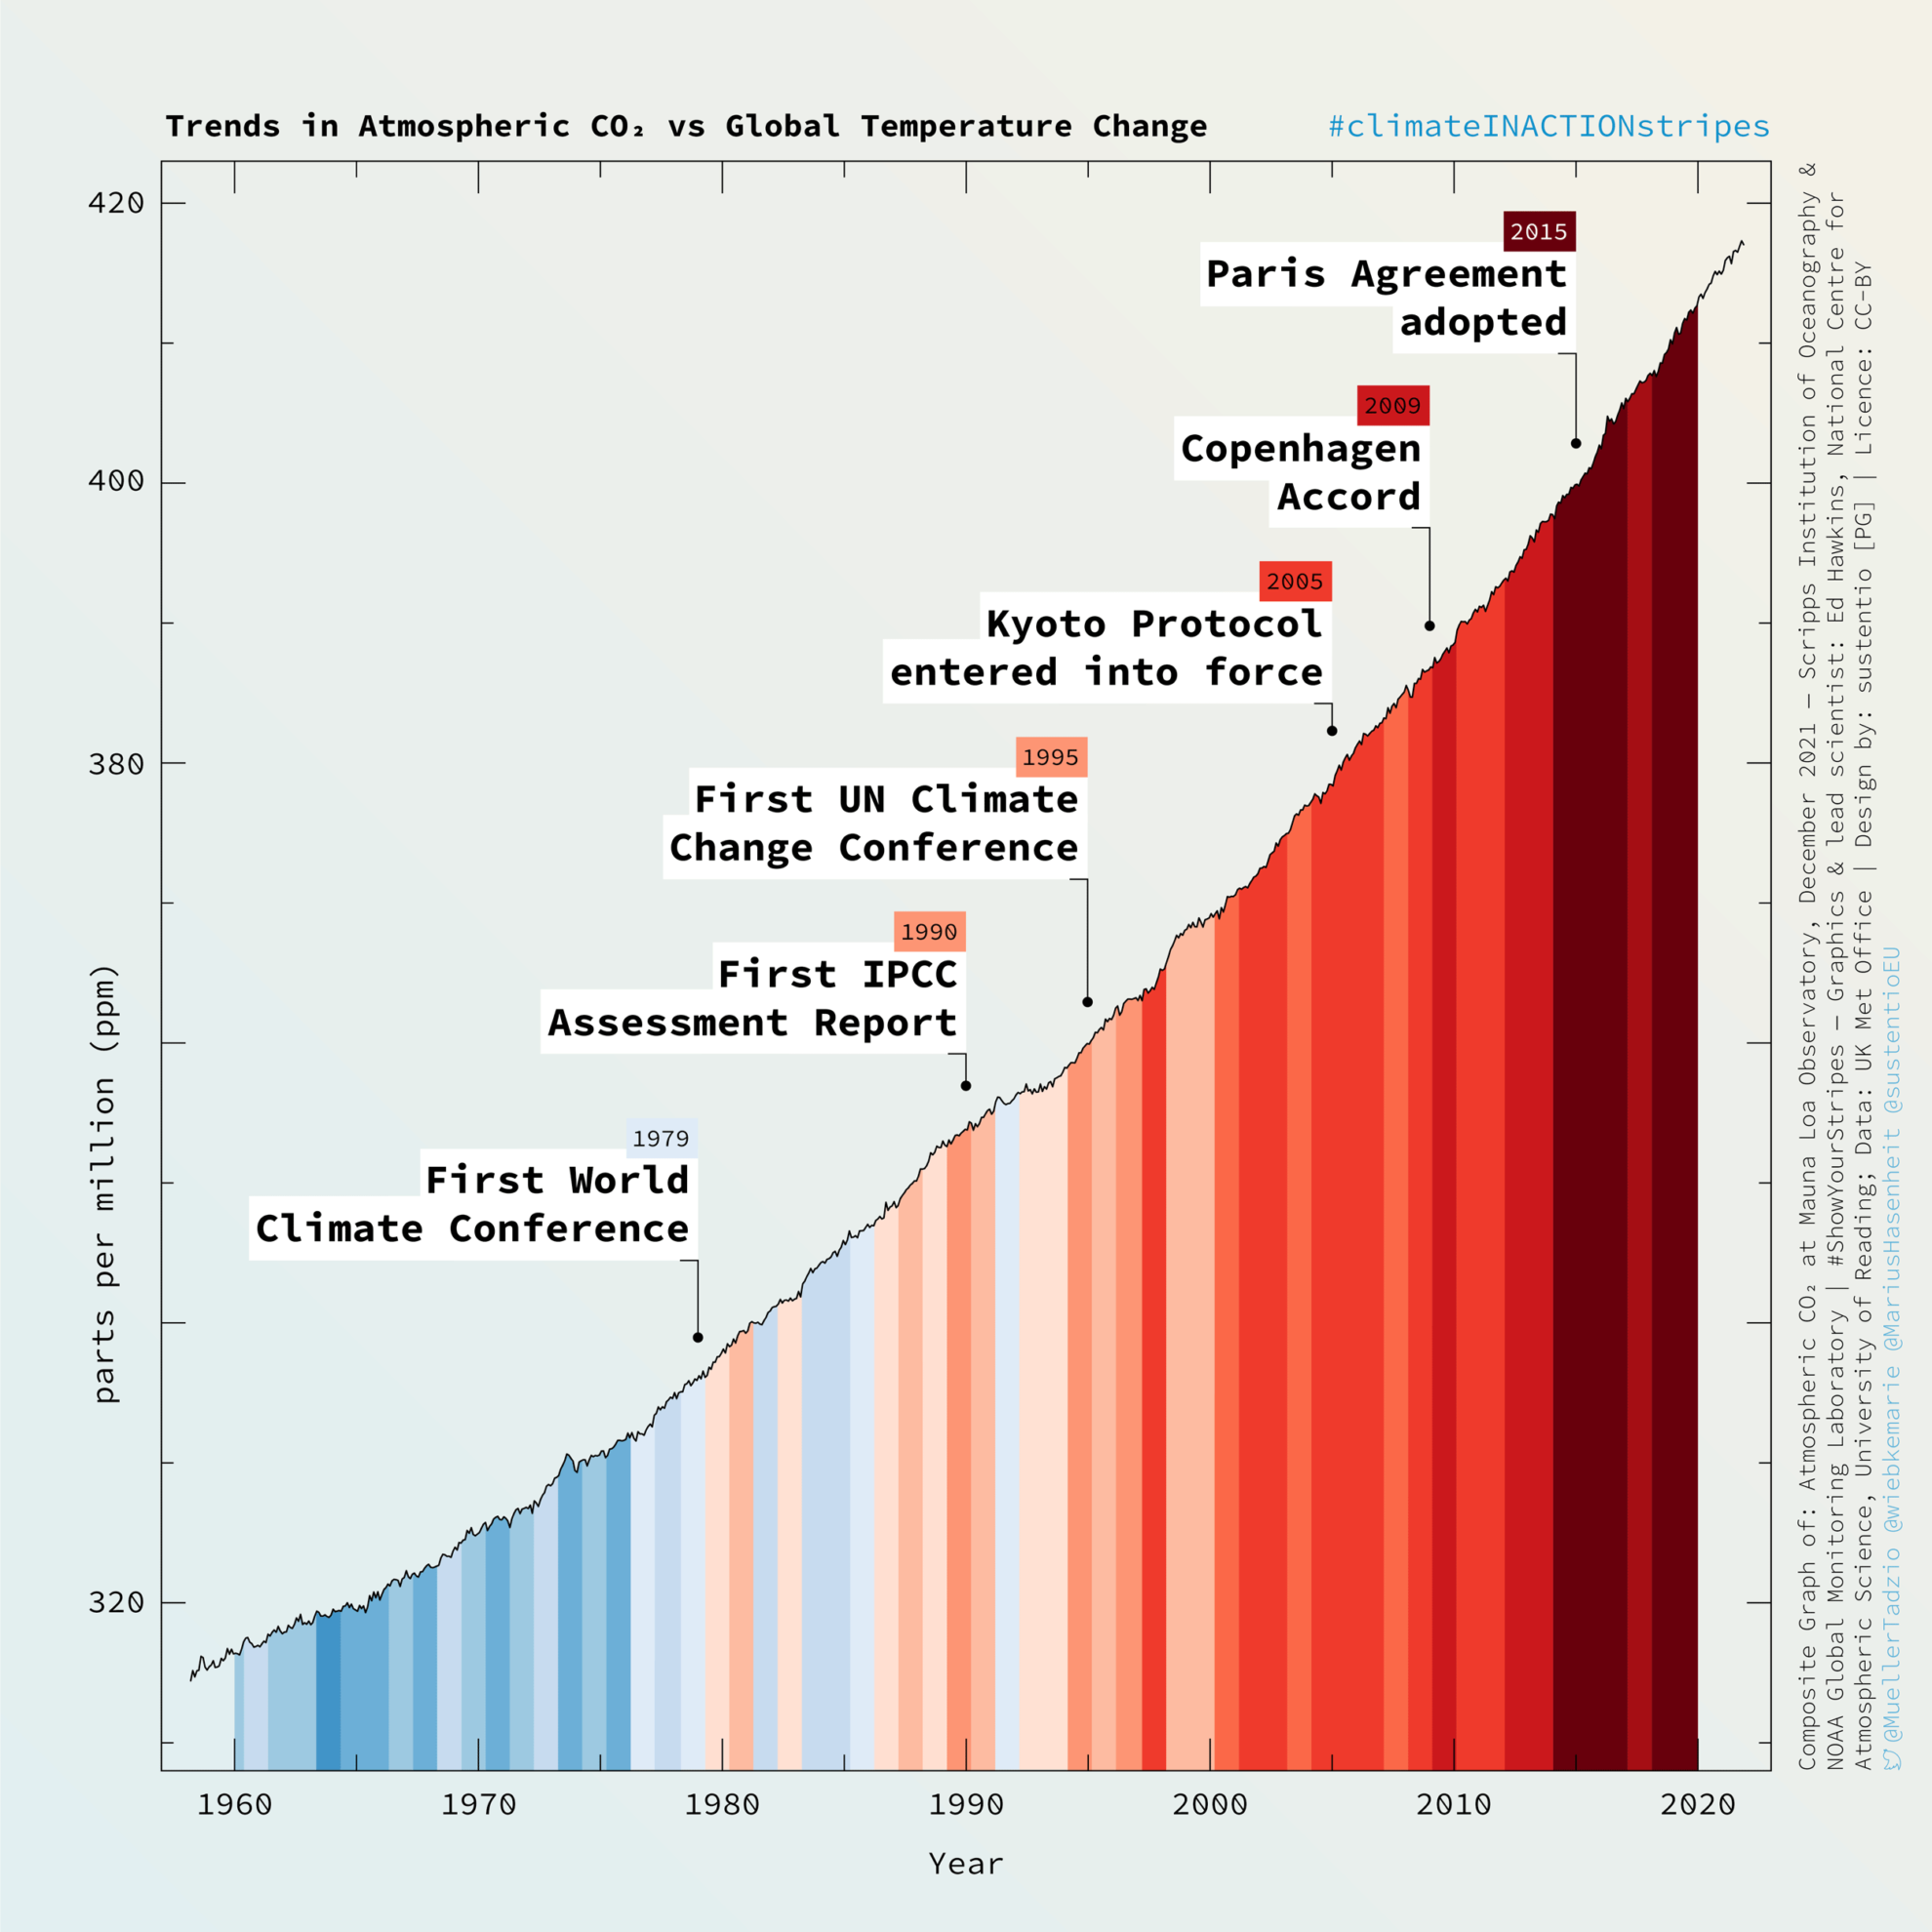 Trends in atmospheric CO2 vs. global temperature change, 1958-2020, with climate conference dates indicated. #climateINACTIONstripes Graphic: @MuellerTadzio / @wiebkemarie / @MariusHasenheit / @sustentioEU